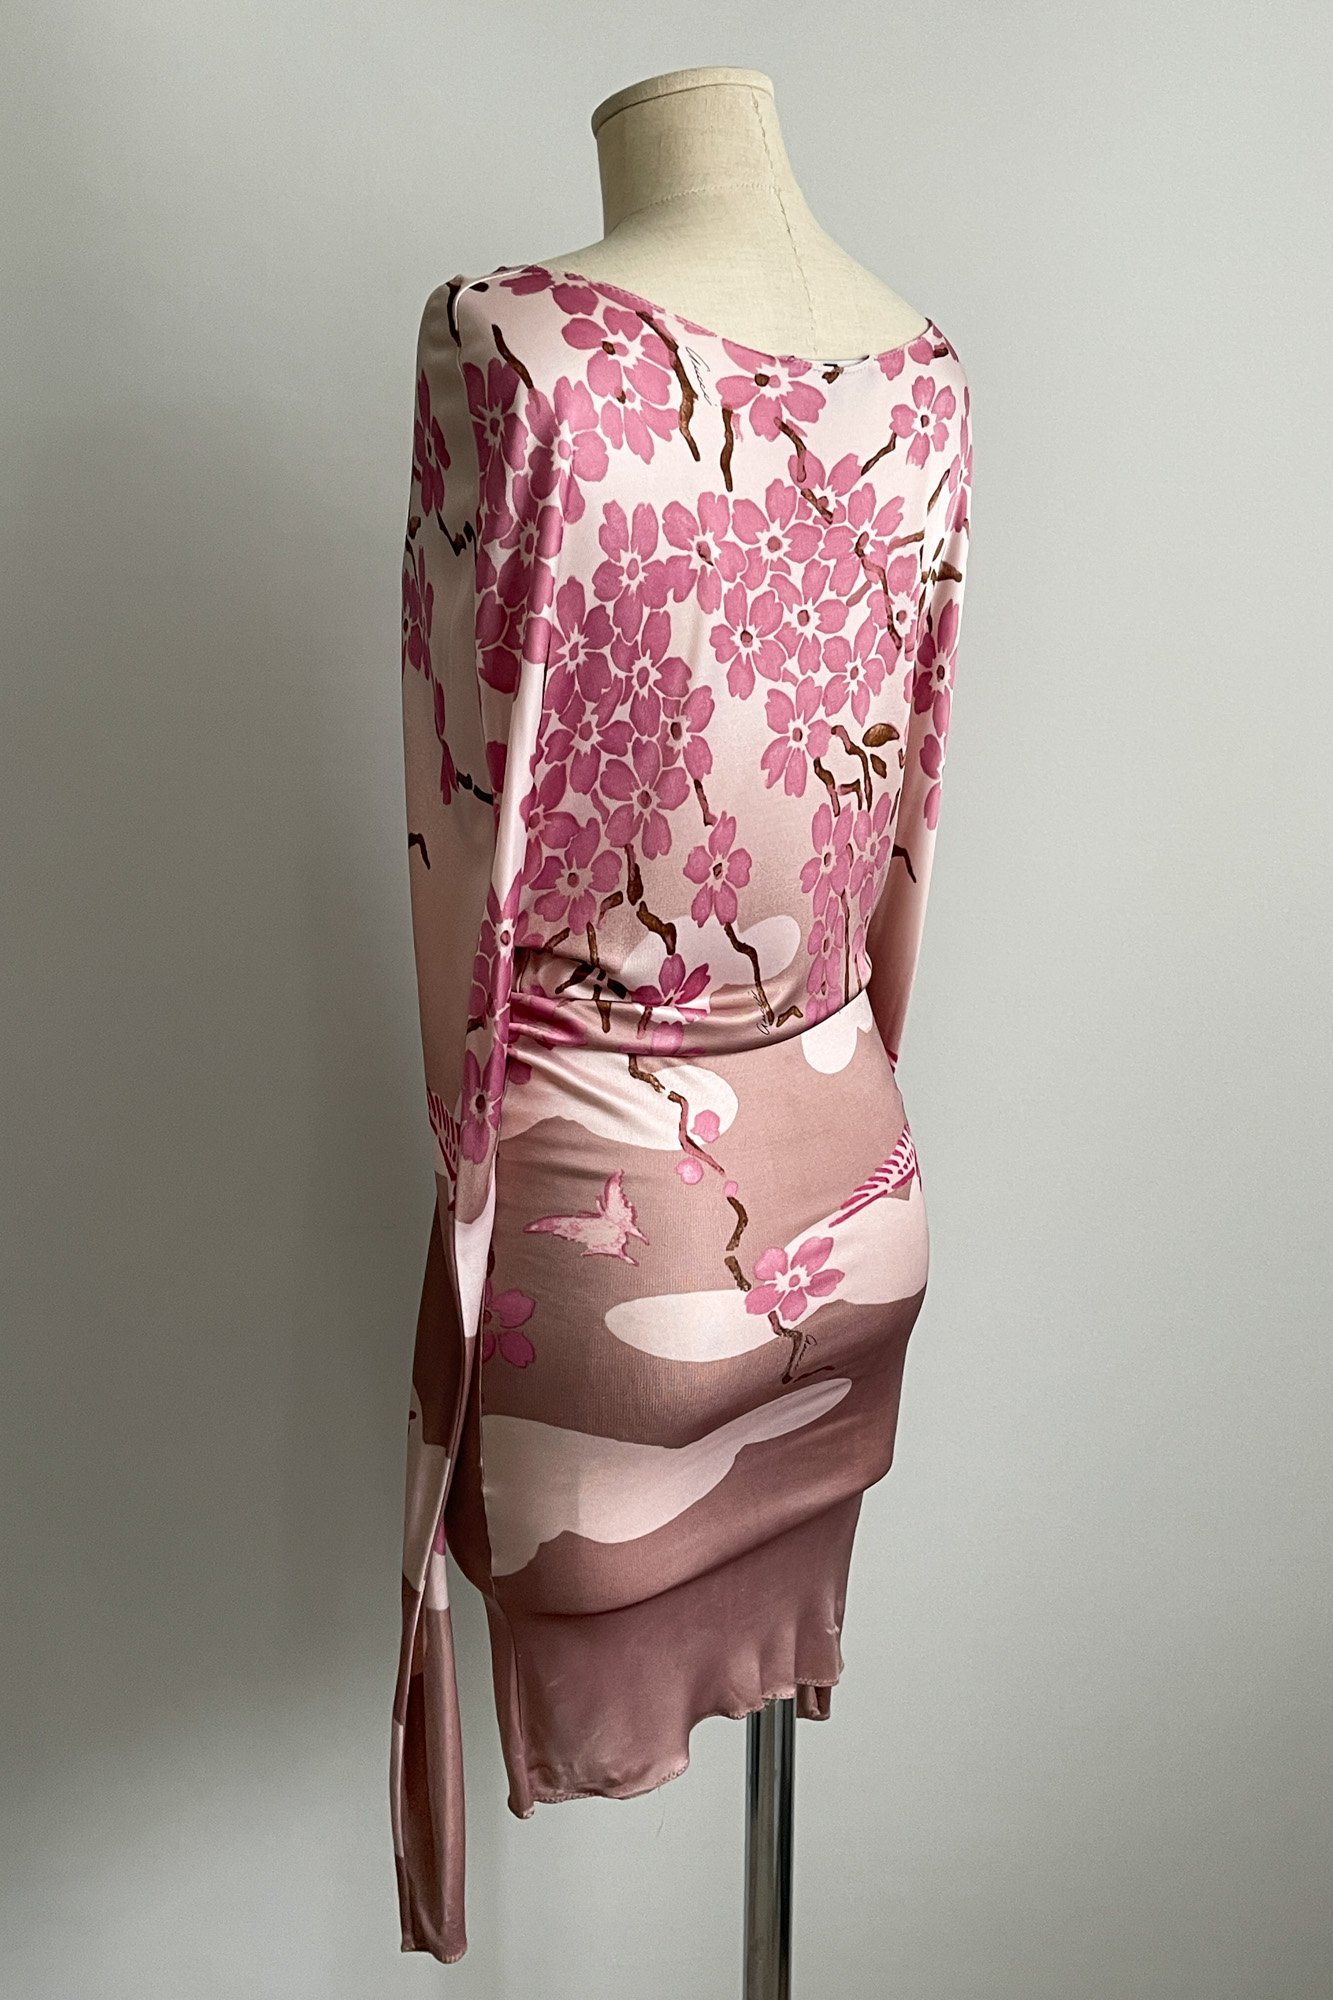 Iconic S/S 2003 Campaign Cherry Blossom Dress